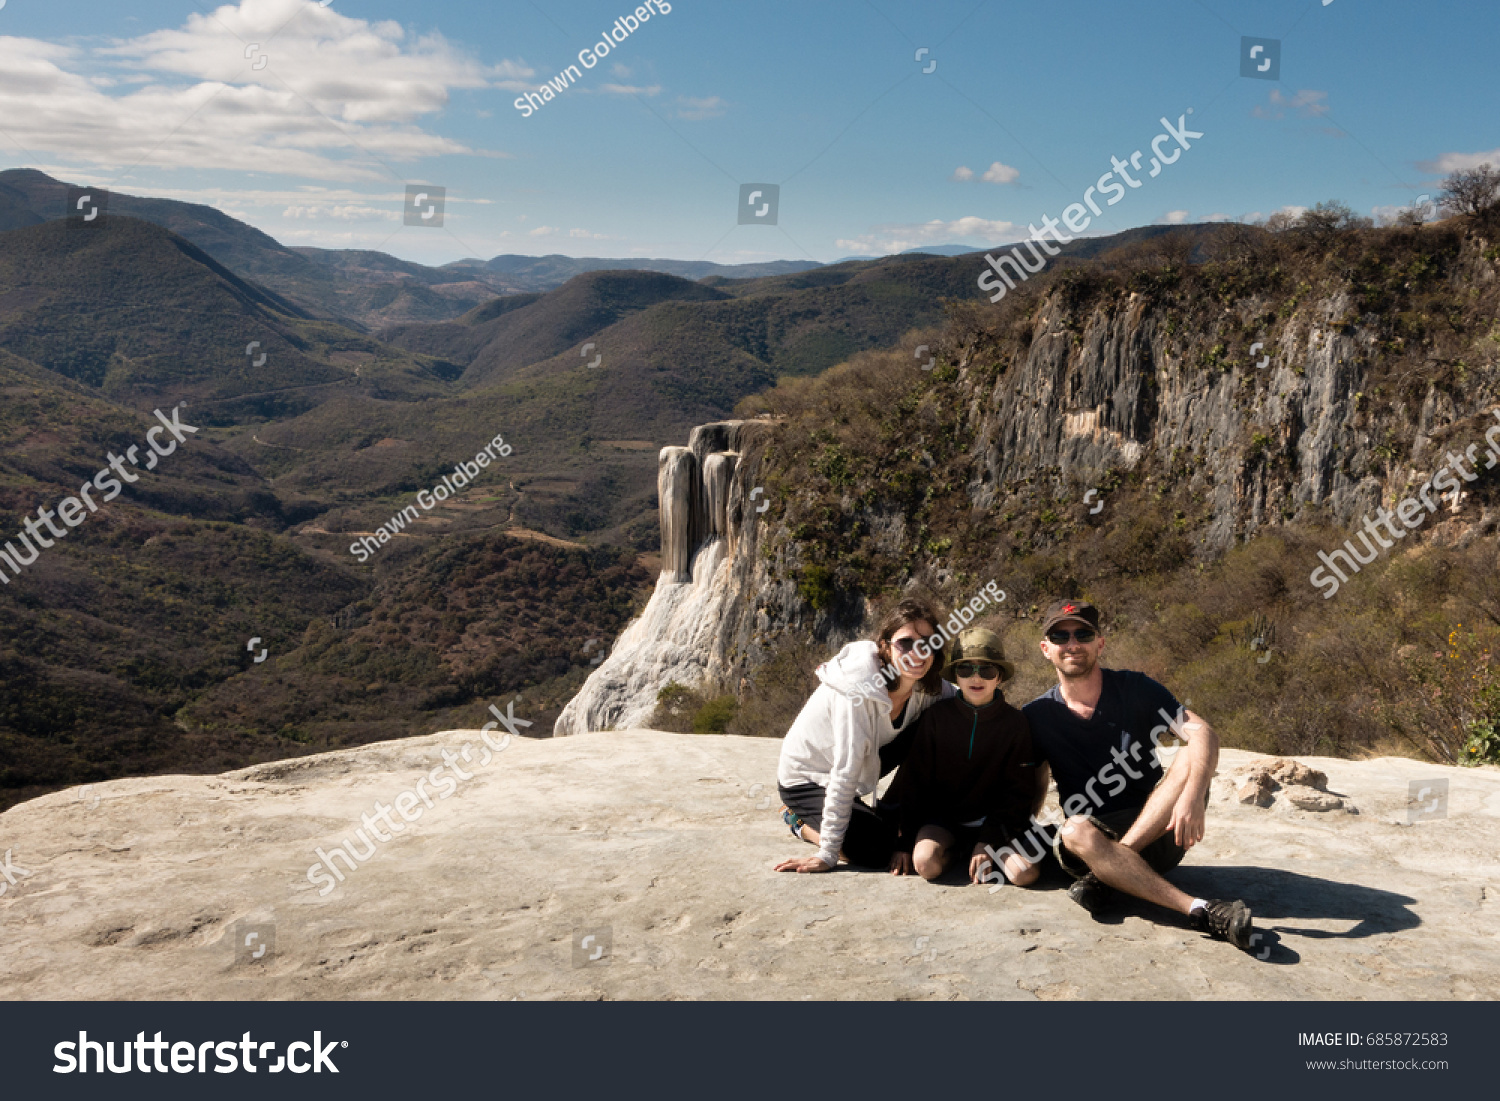 HIERVE EL AGUA, OAXACA, MEXICO - JANUARY 25, 2015: MOTHER, SON AND FATHER POSE FOR PHOTO AT Hierve el Agua, a set of natural rock formations that resemble cascades of water.  #685872583